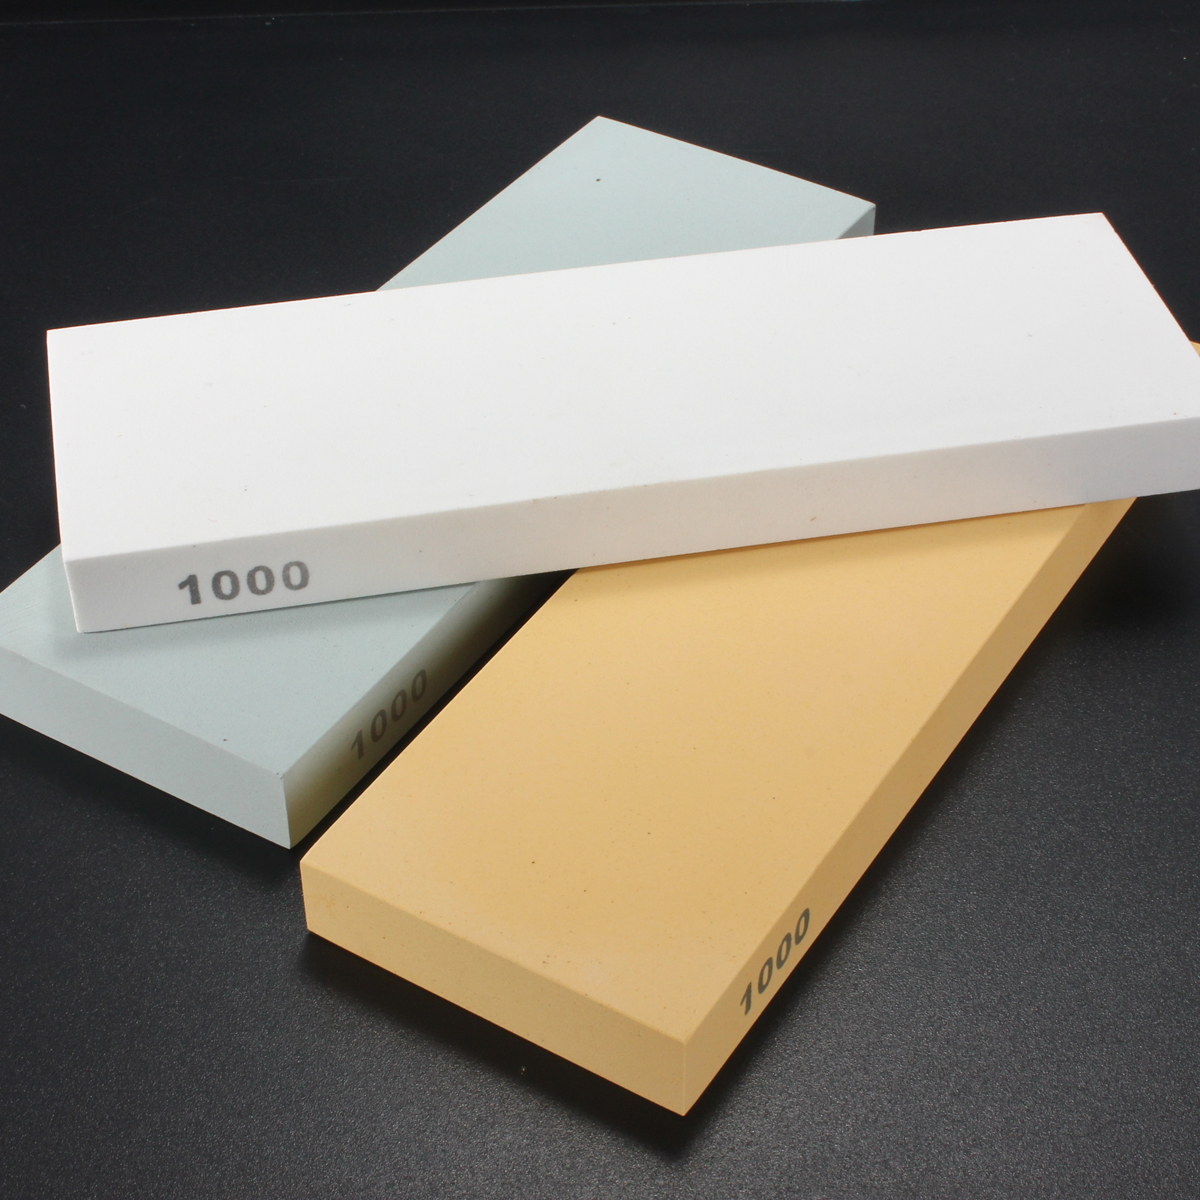 1000-Grit-Whetstone-Sharpener-Sharpen-Stone-With-Stand-180mm-x-60mm-x-15mm-1324622-2